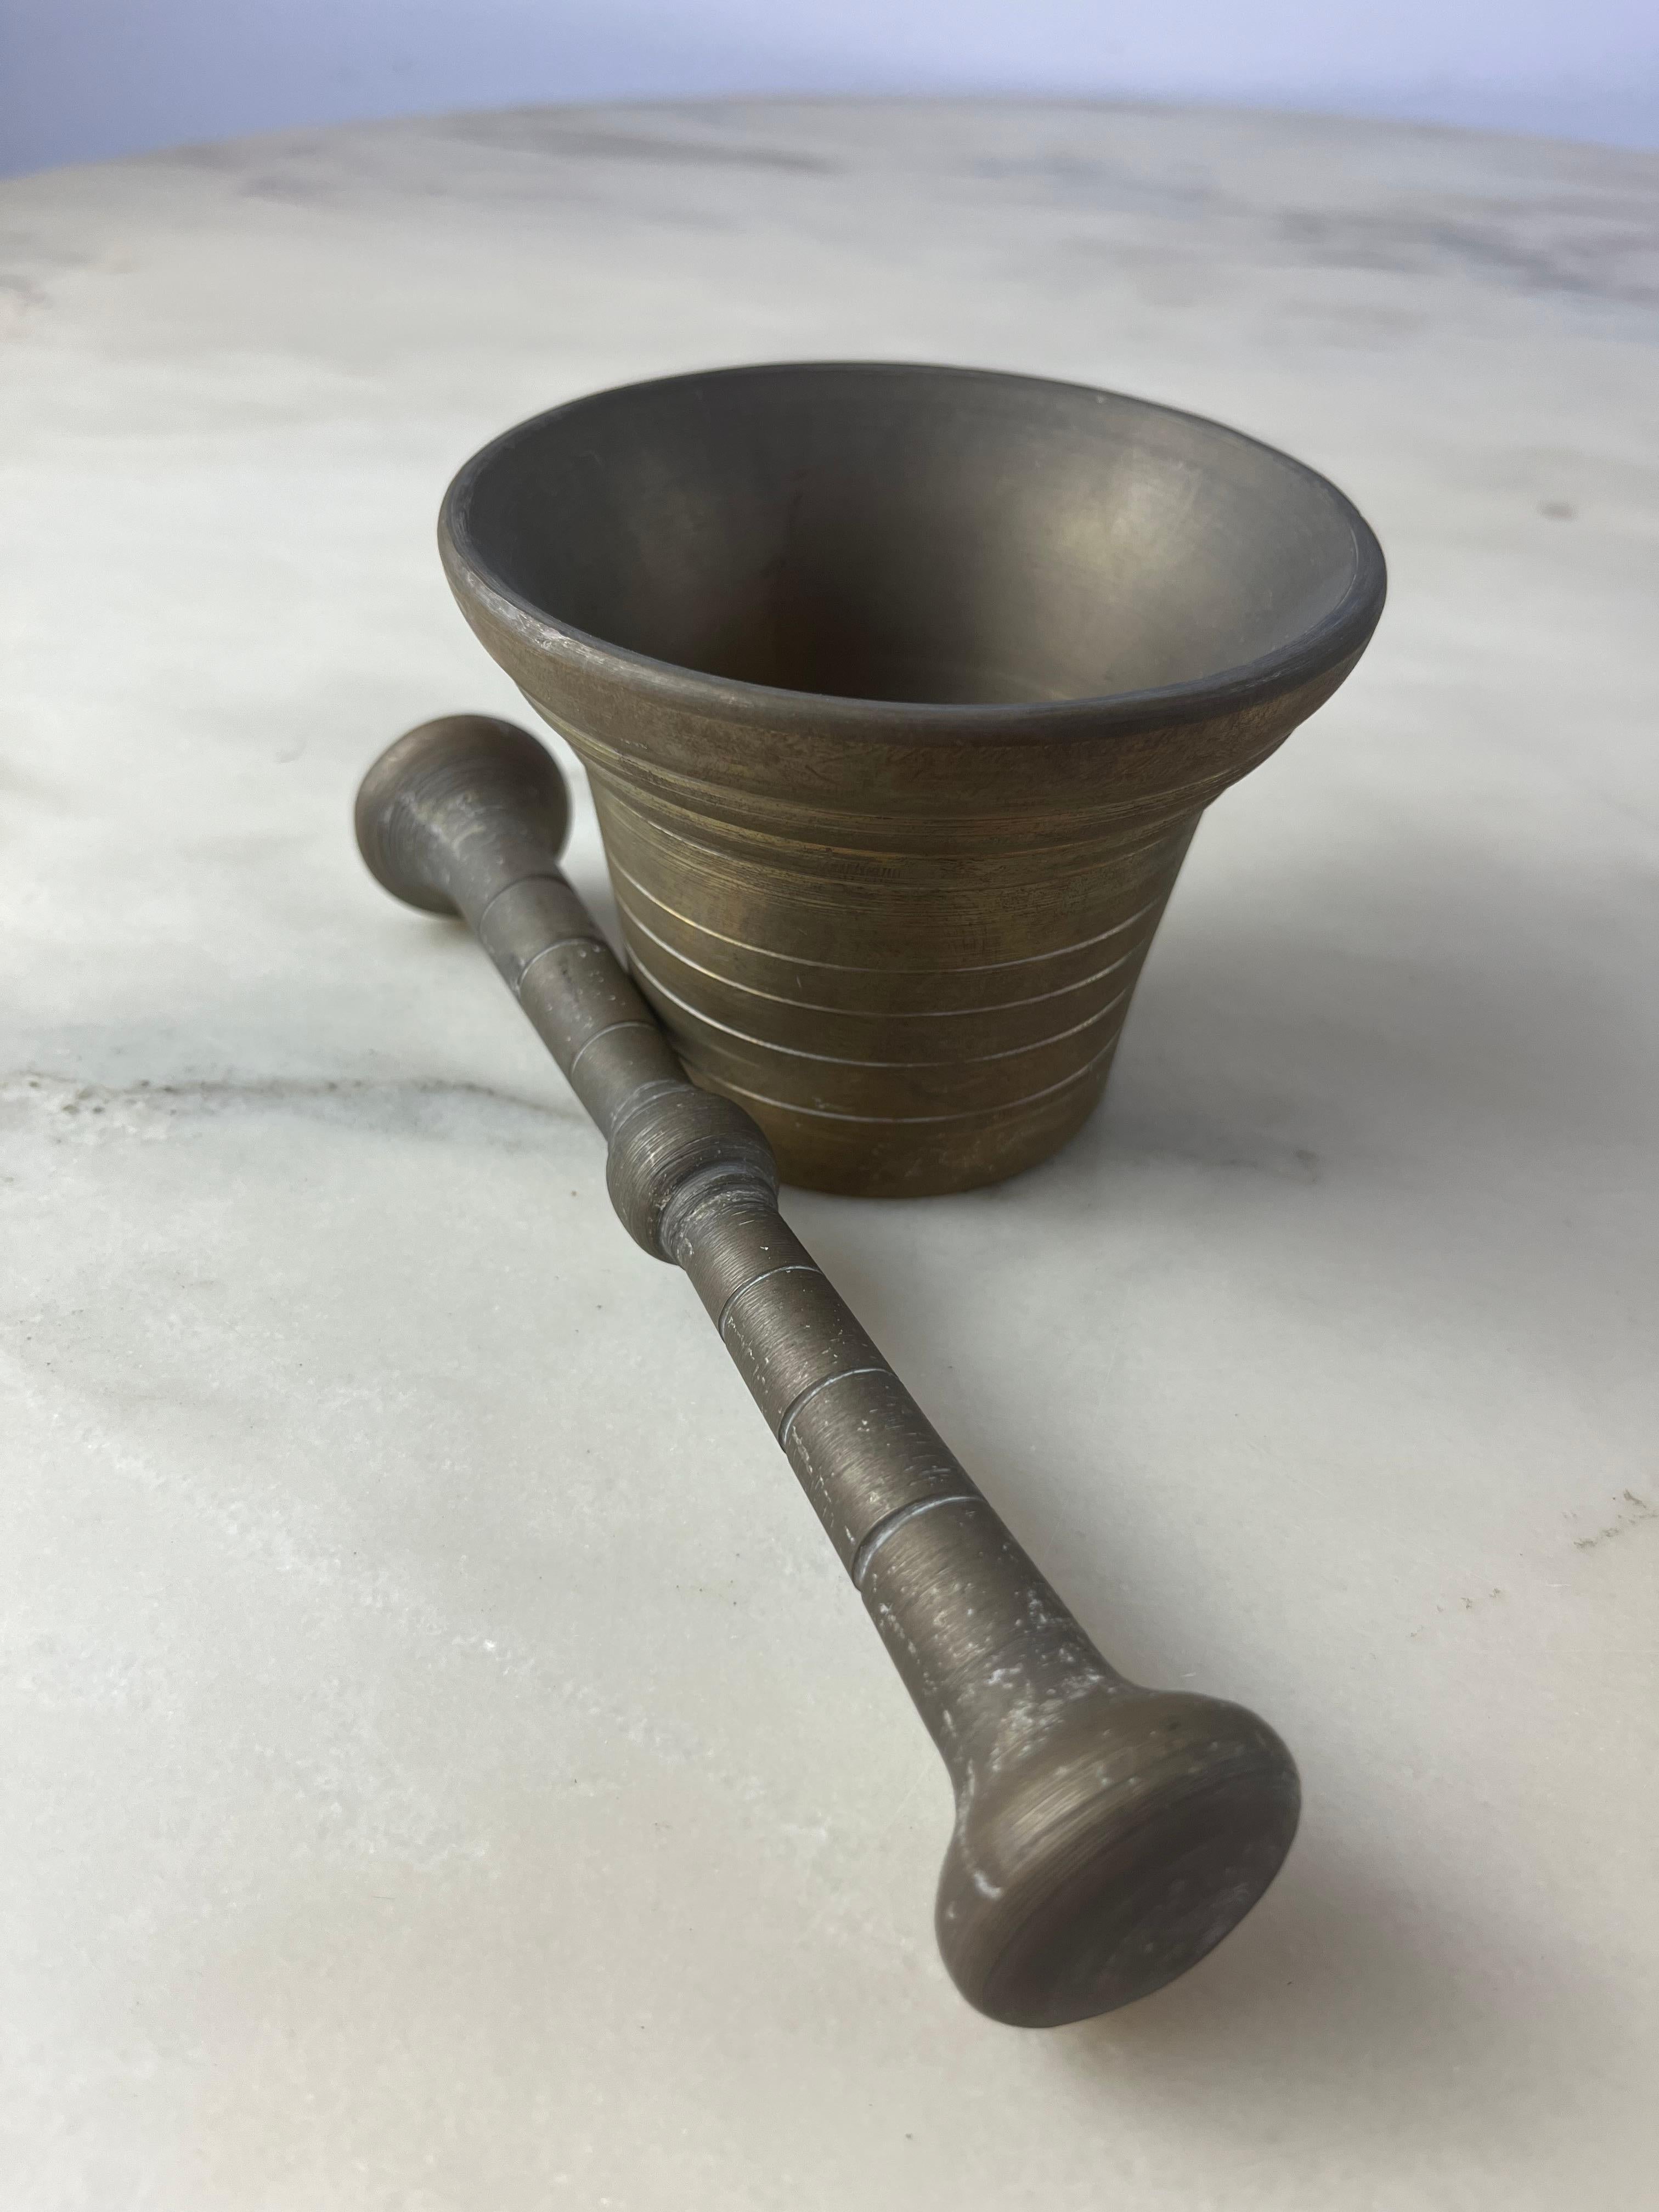 Bronze mortar and pestle, Italy, 1950s
Found in a country house. Good conditions. The mortar has a height of 8 cm and a diameter of 10 cm. The pestle is 18 cm long.